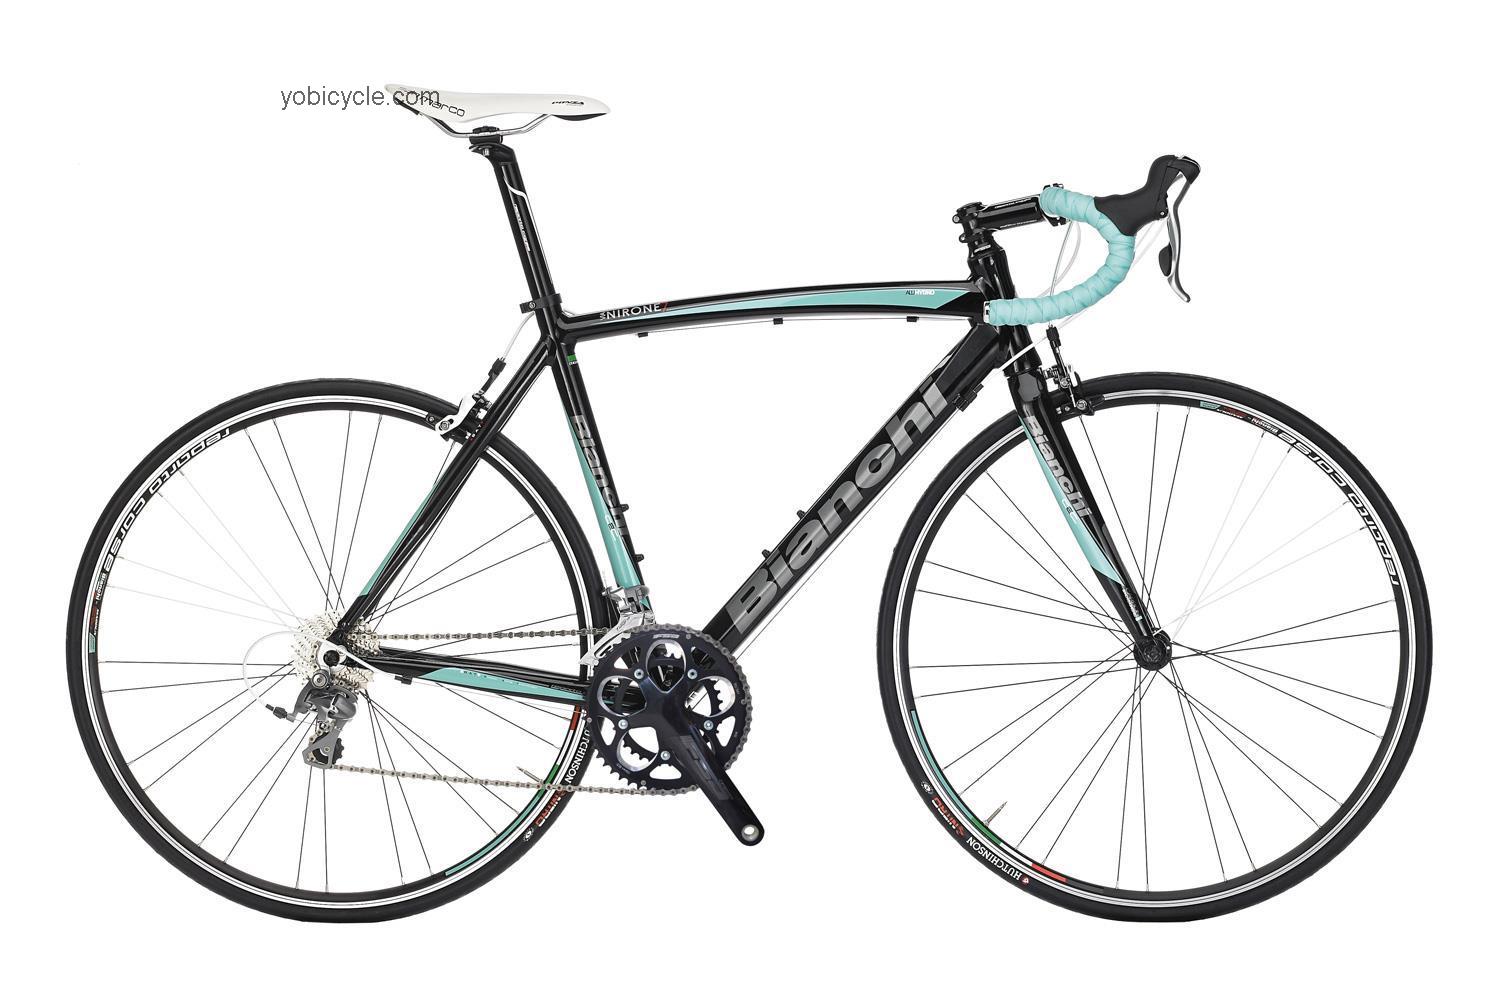 Bianchi Via Nirone 7 Tiagra competitors and comparison tool online specs and performance